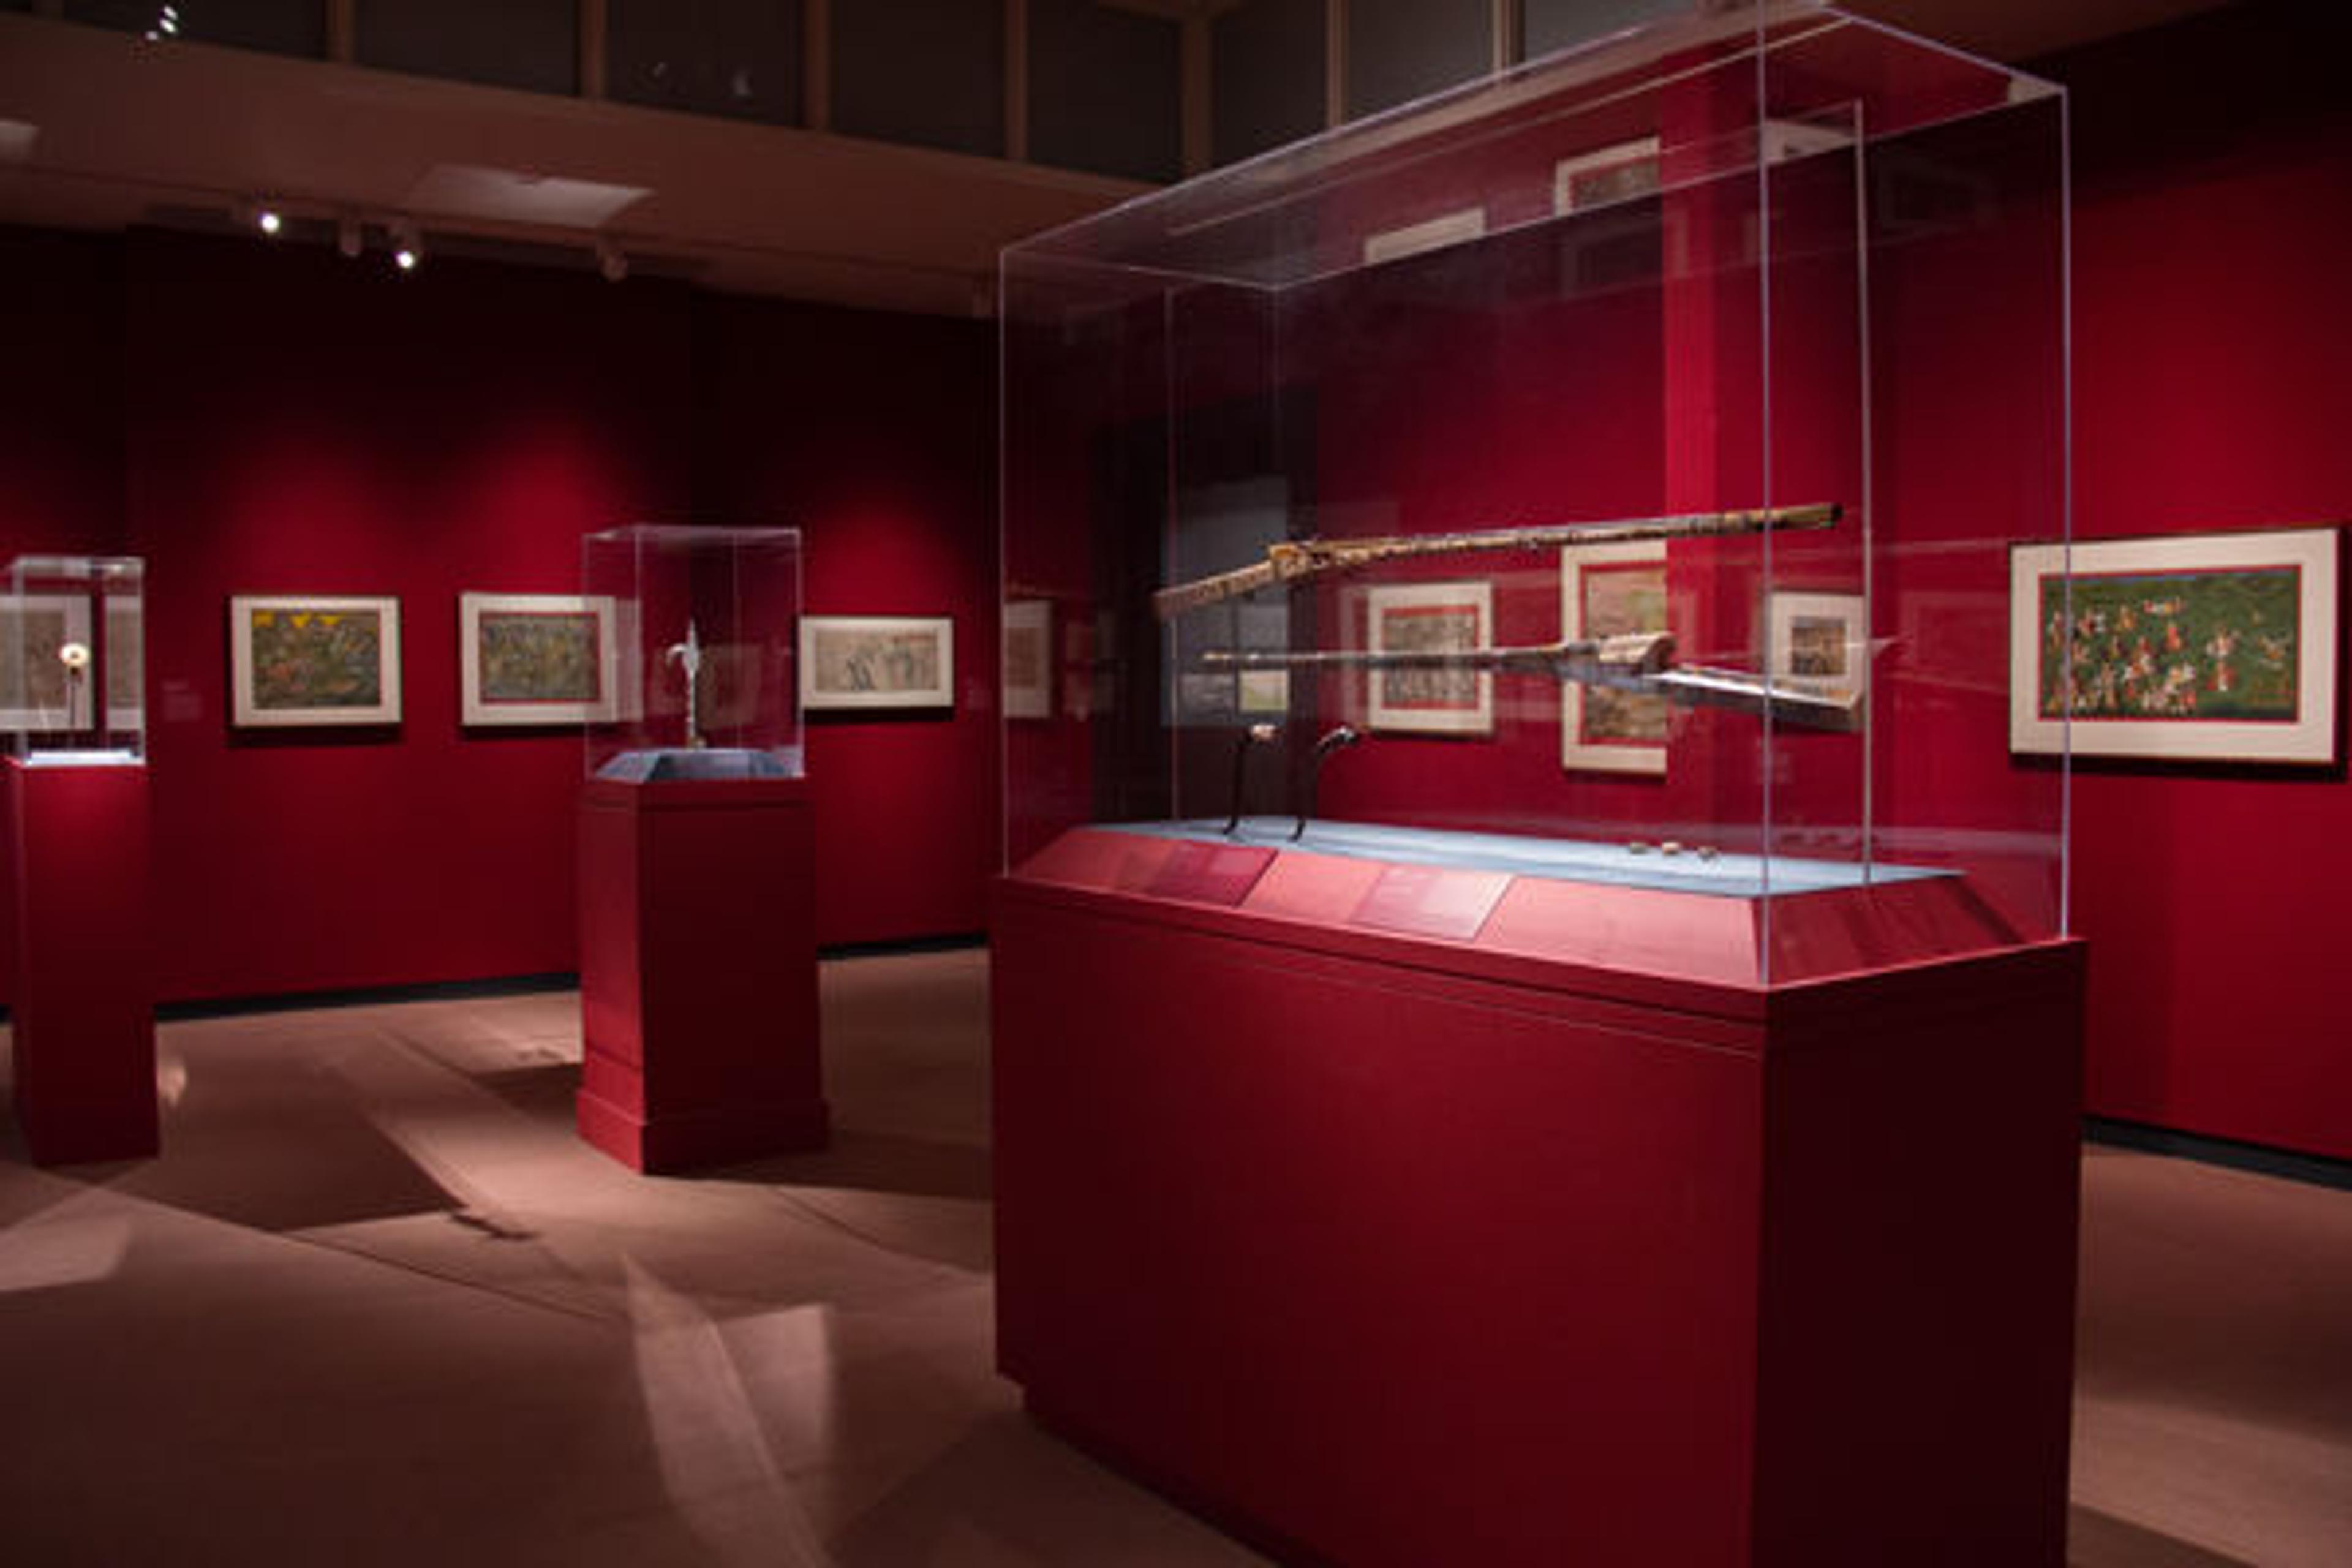 Gallery view of The Royal Hunt: Courtly Pursuits in Indian Art, which comprises paintings and regalia drawn from the permanent collections of the Met's Department of Asian Art, the Department of Islamic Art, and the Department of Arms and Armor, as well as a few objects on loan from private collections.